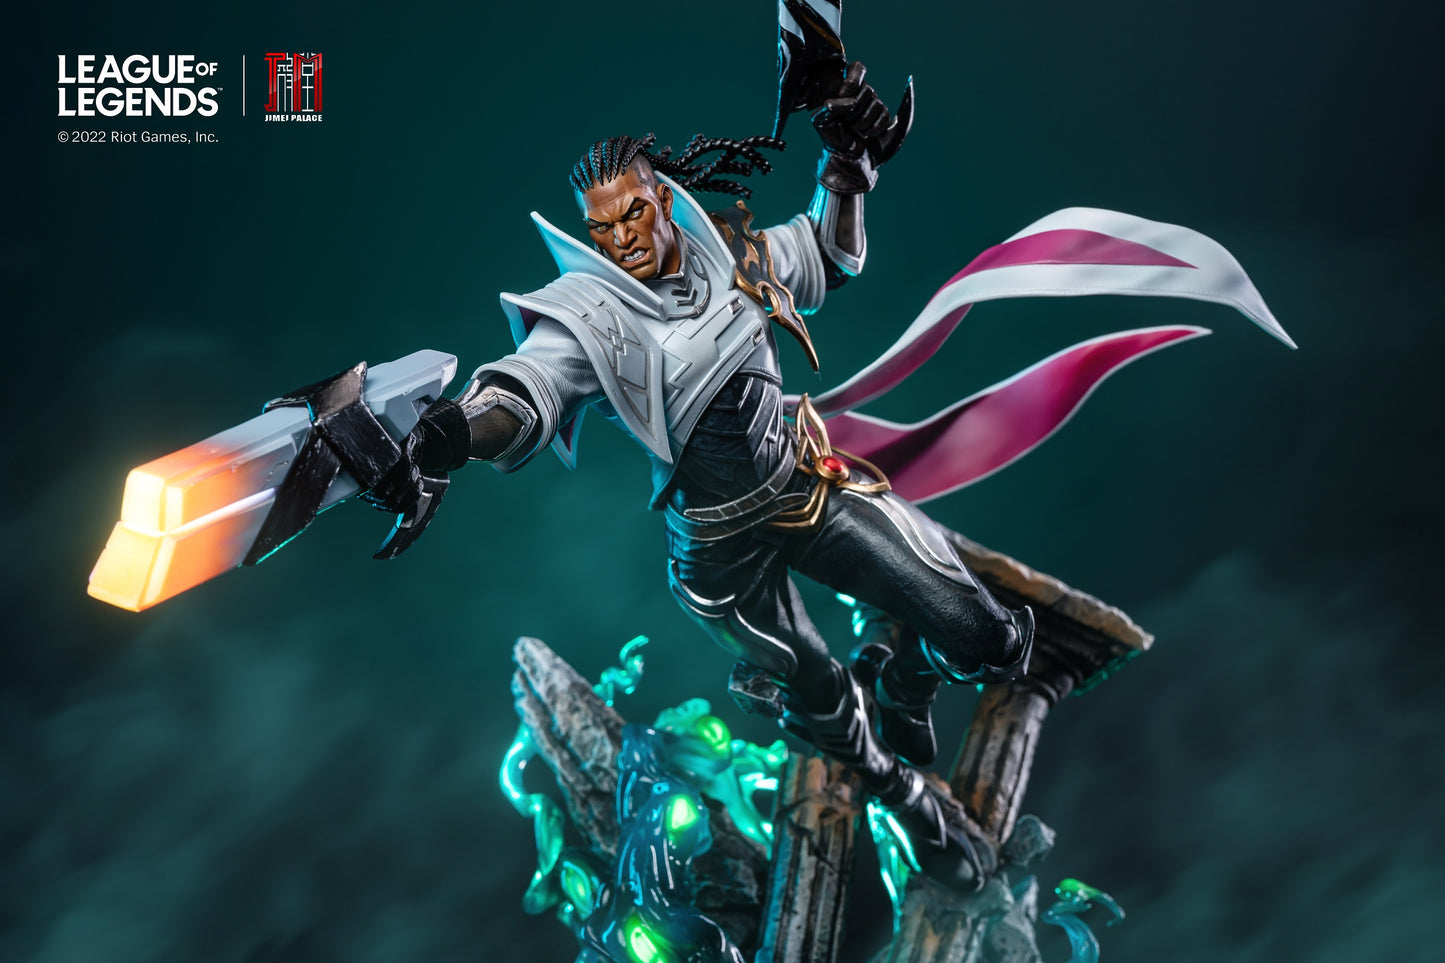 Jimei Palace - League of Legends Lucian (Licensed) [PRE-ORDER]